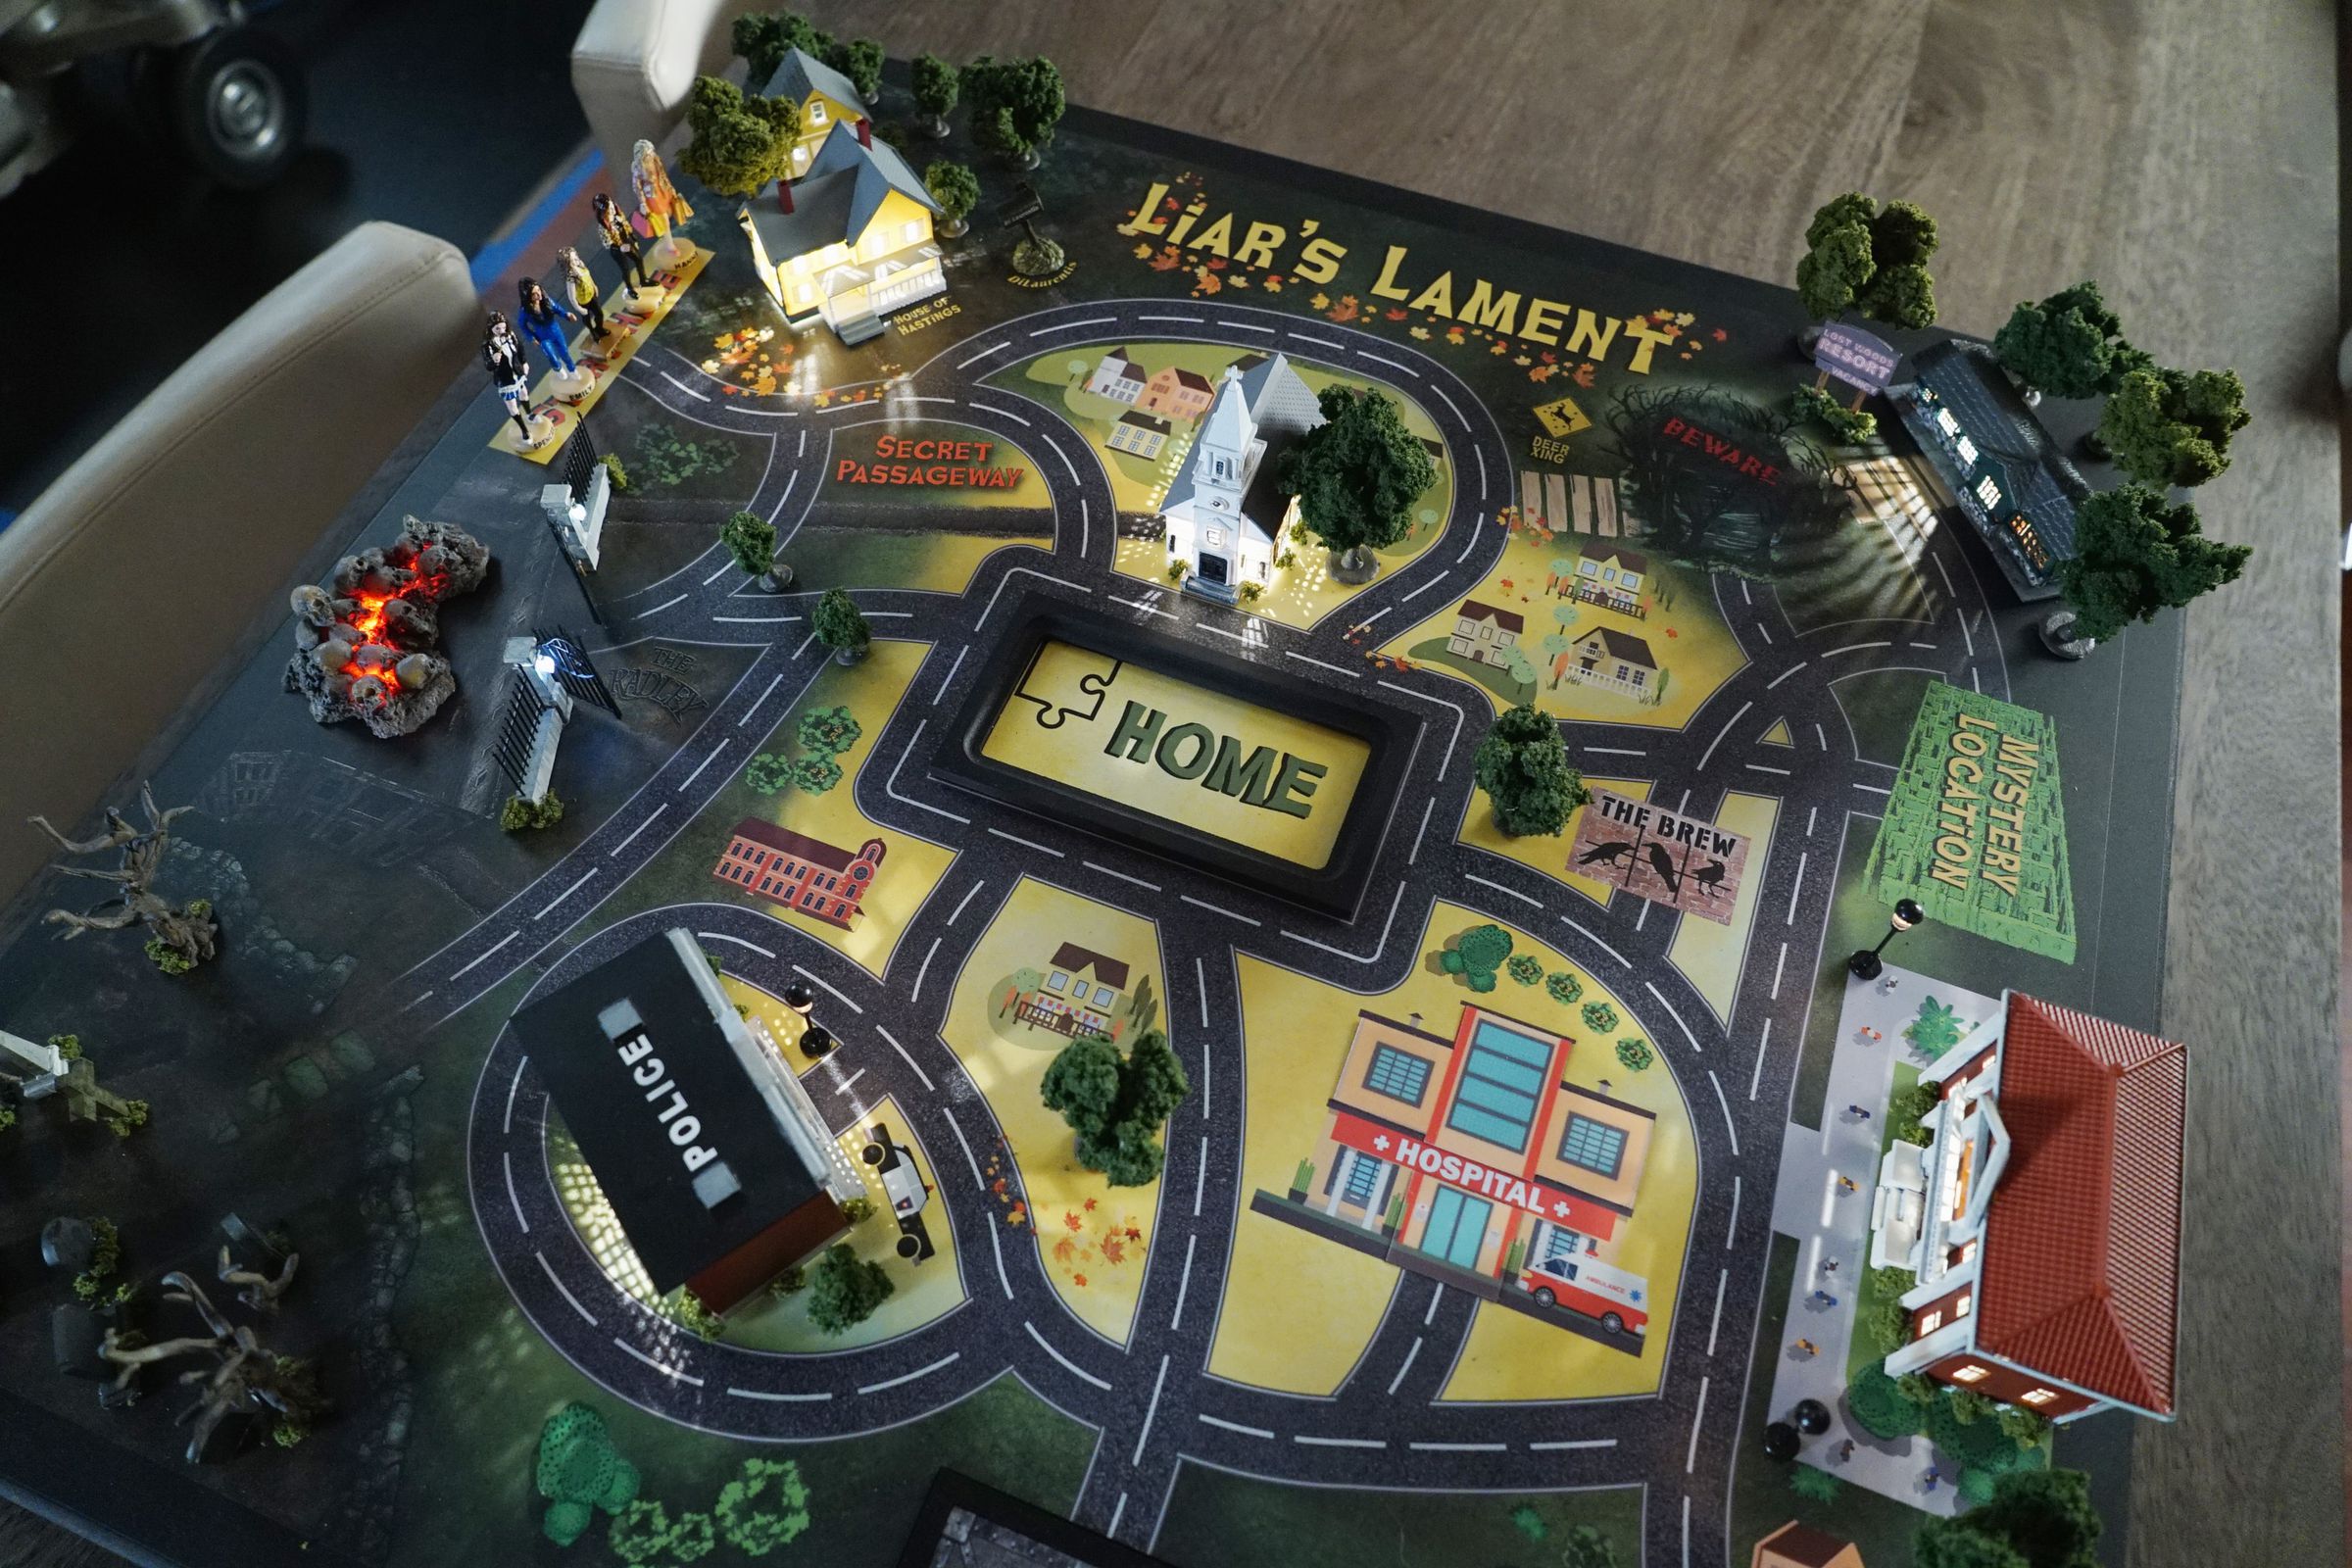 A still of the elaborate board game taken from Season 7, Episode 11.